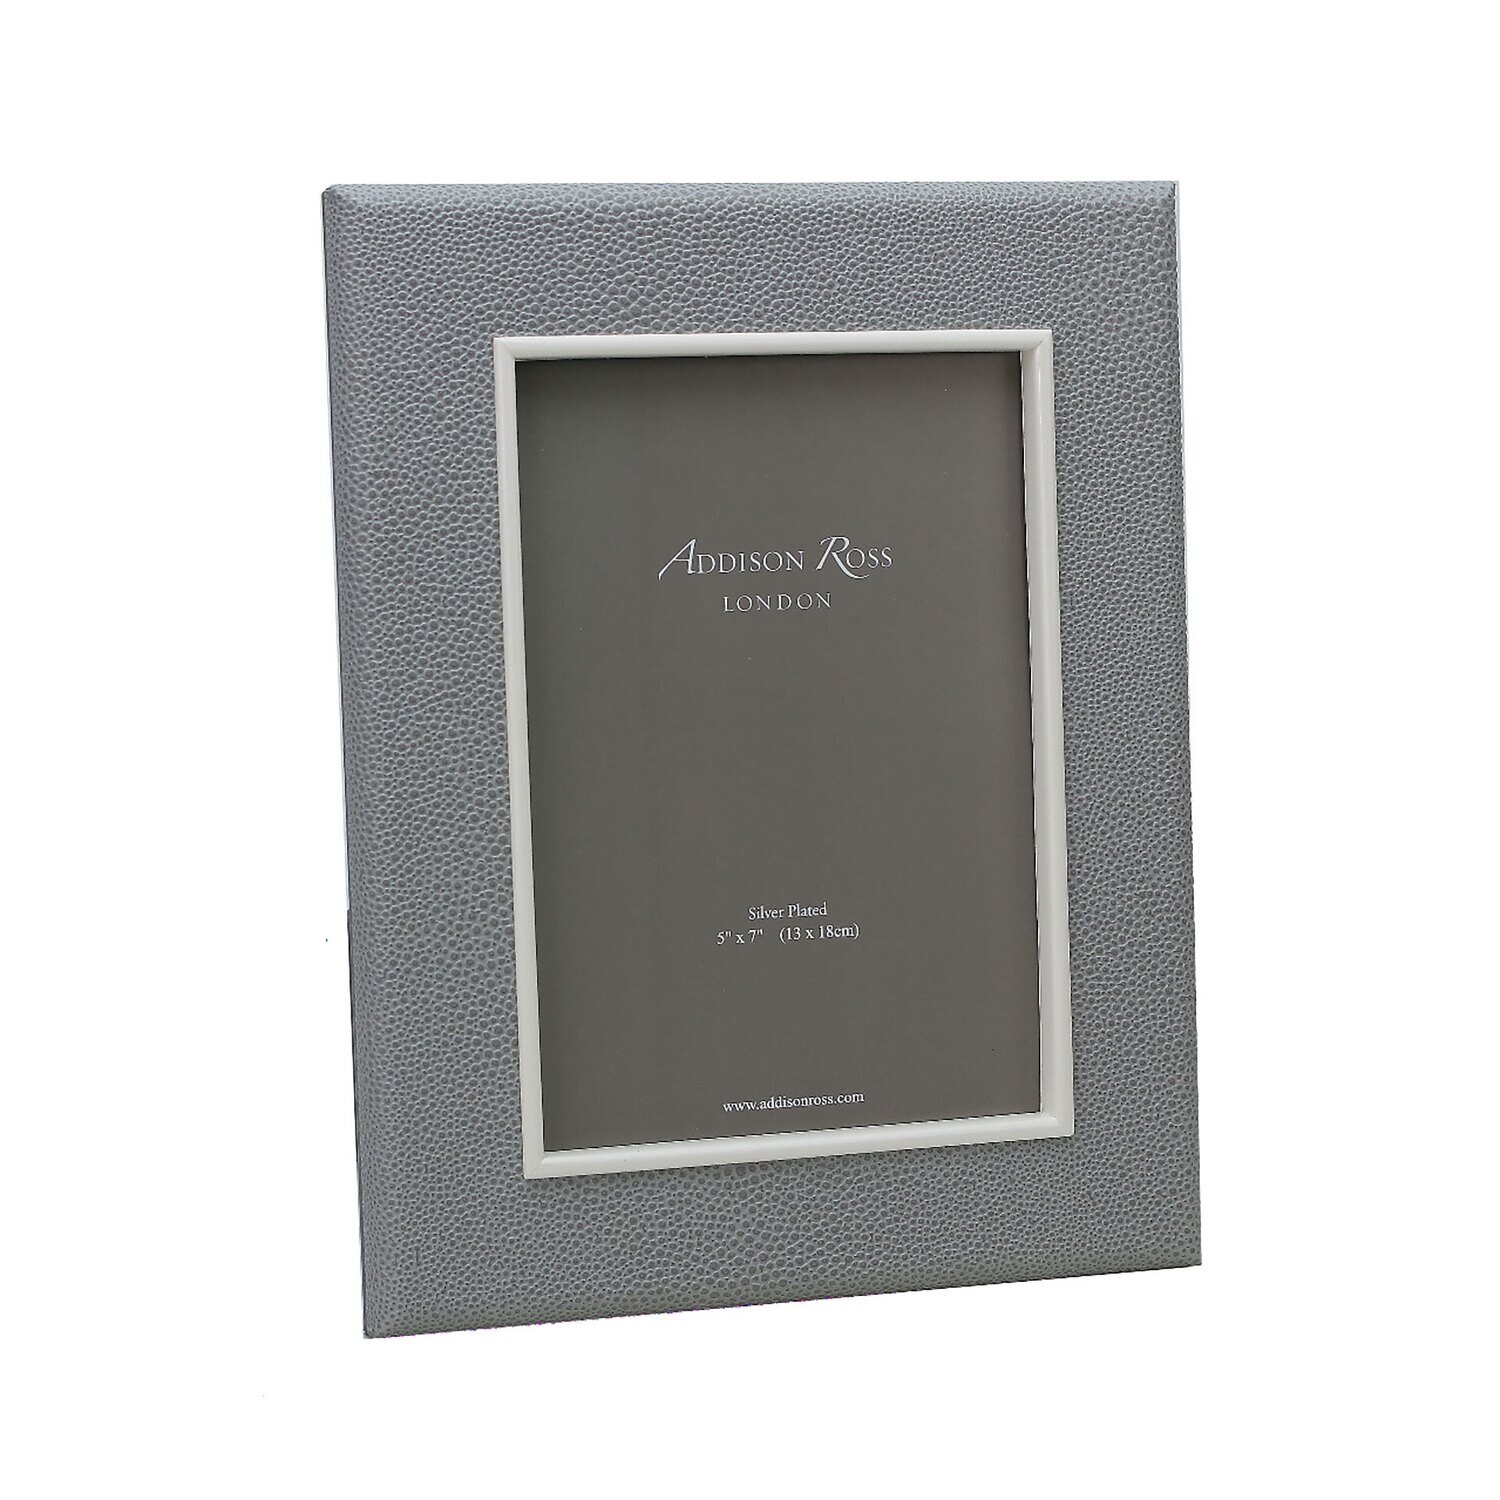 Addison Ross 5 x 7 Inch Grey Shagreen Picture Frame PU Leather FR3000